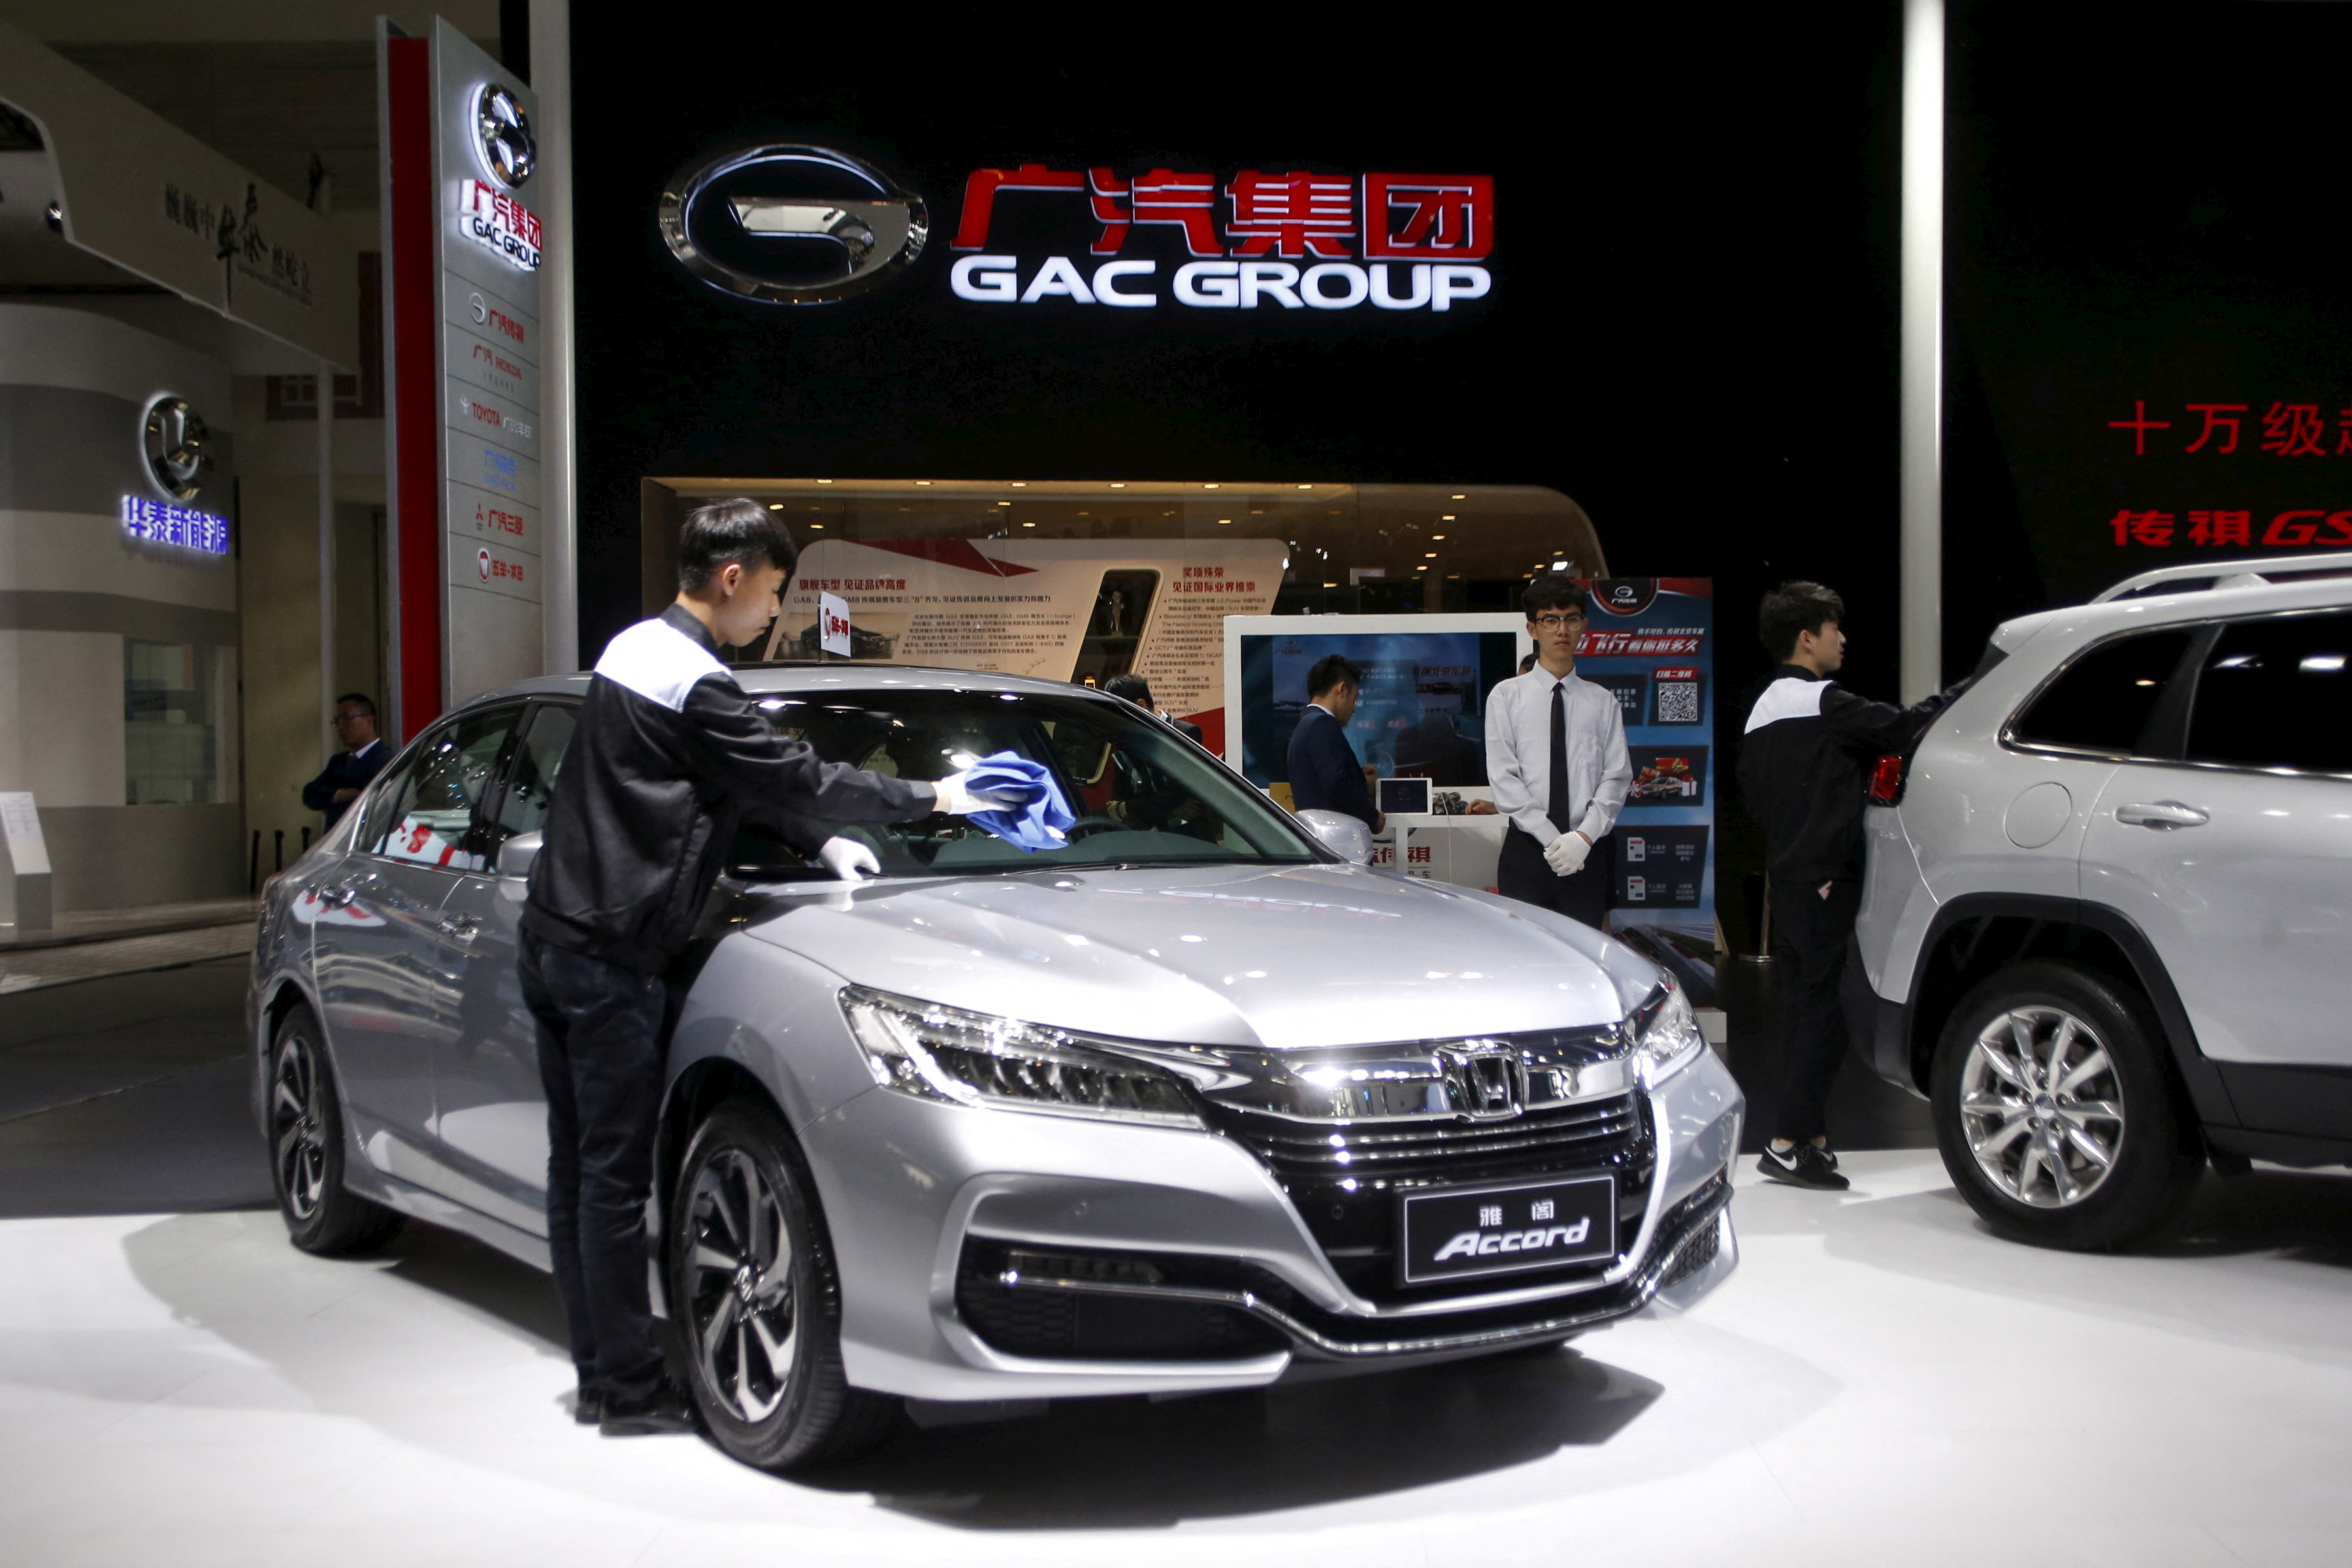 A staff member cleans Honda brand's accord sedan model at the booth of Guangzhou Automobile Group during the Auto China 2016 auto show in Beijing